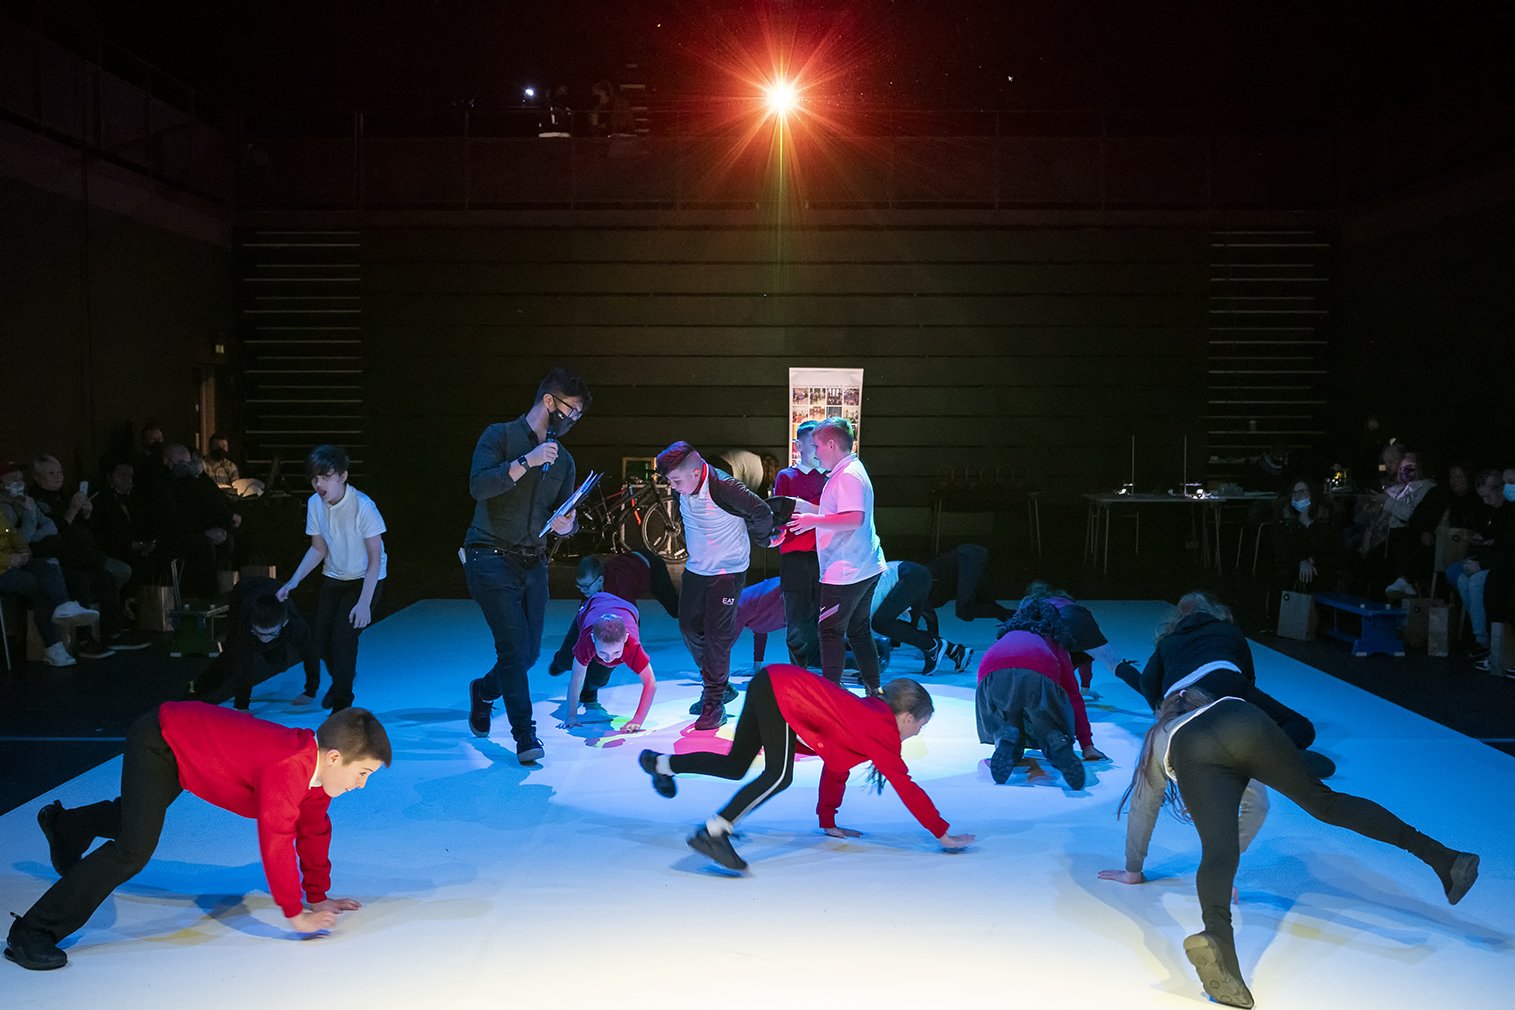  Pupils crawling across the stage with a group of pupils standing in a circle in the centre  